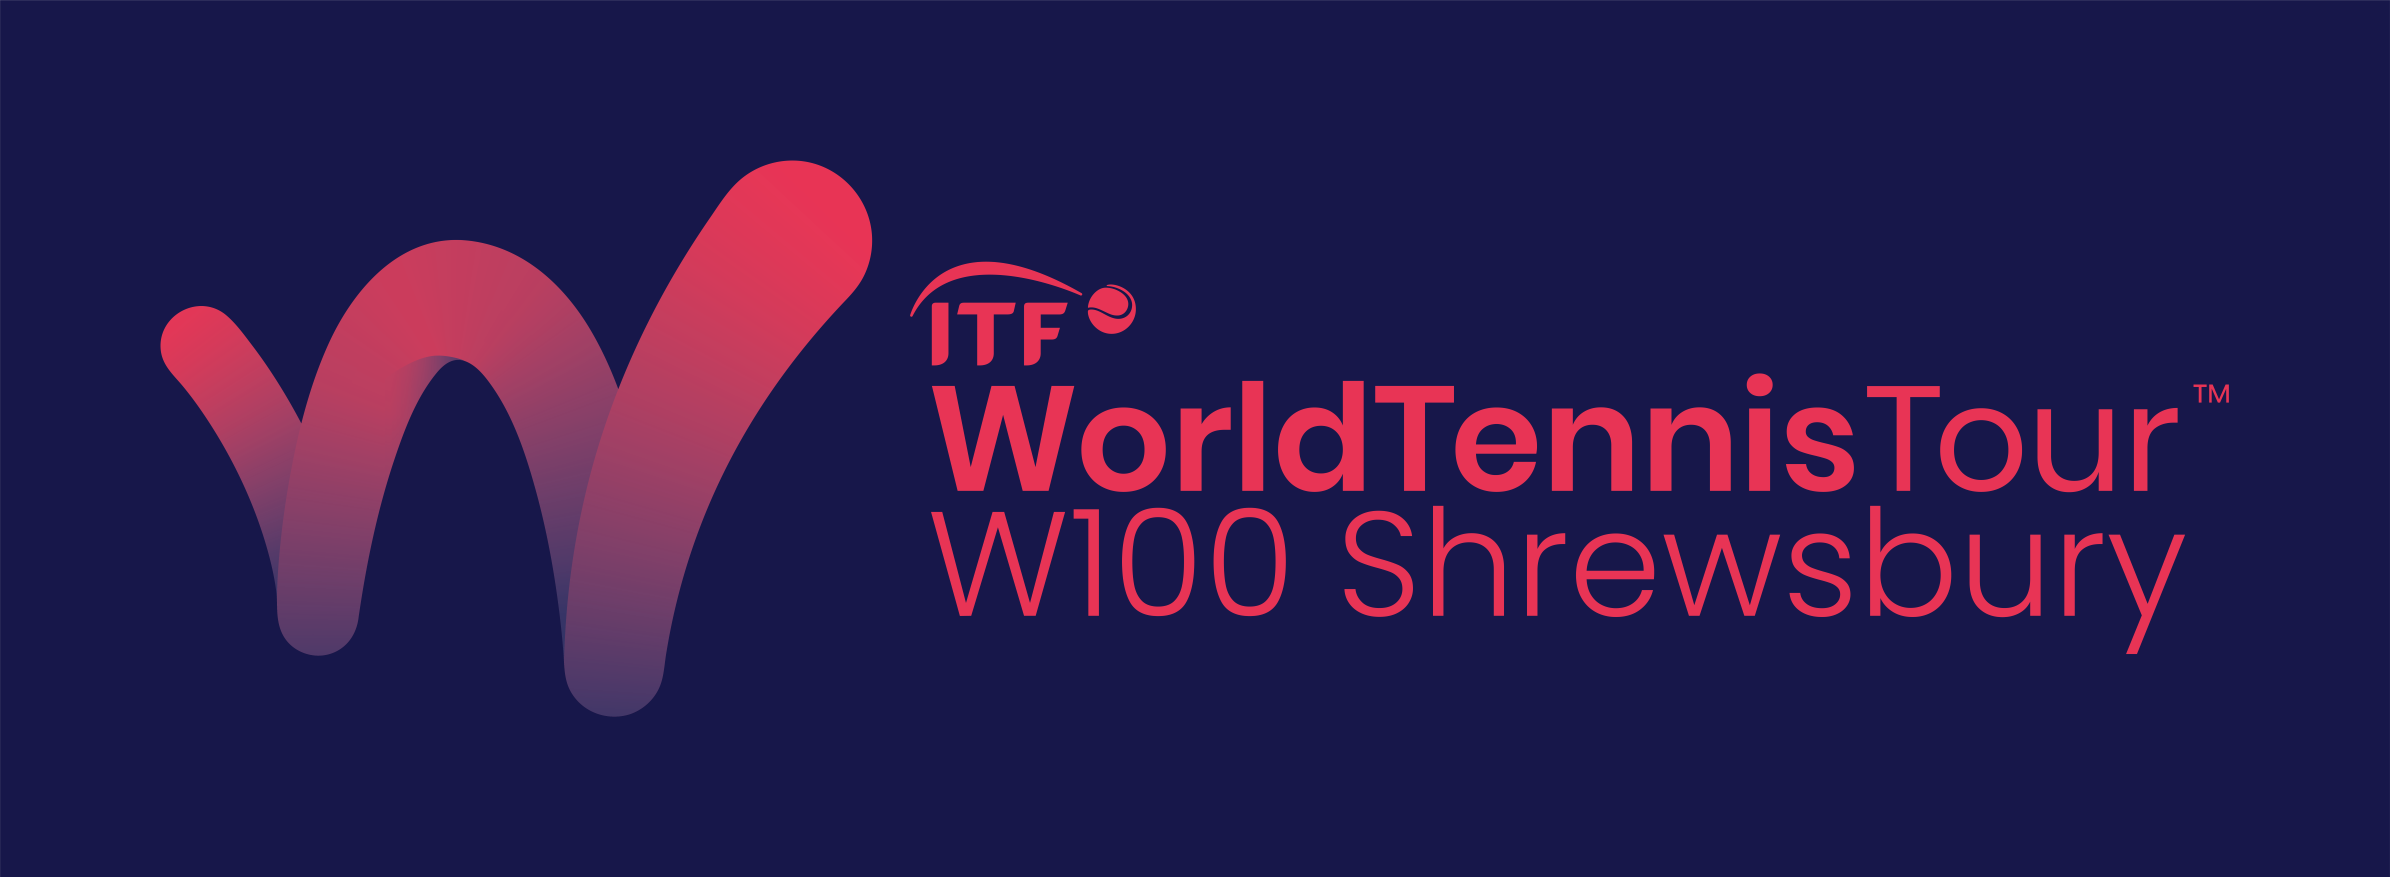 Win a VIP day at the ITF World Tennis Tour W100 in Shrewsbury! — WR Partners